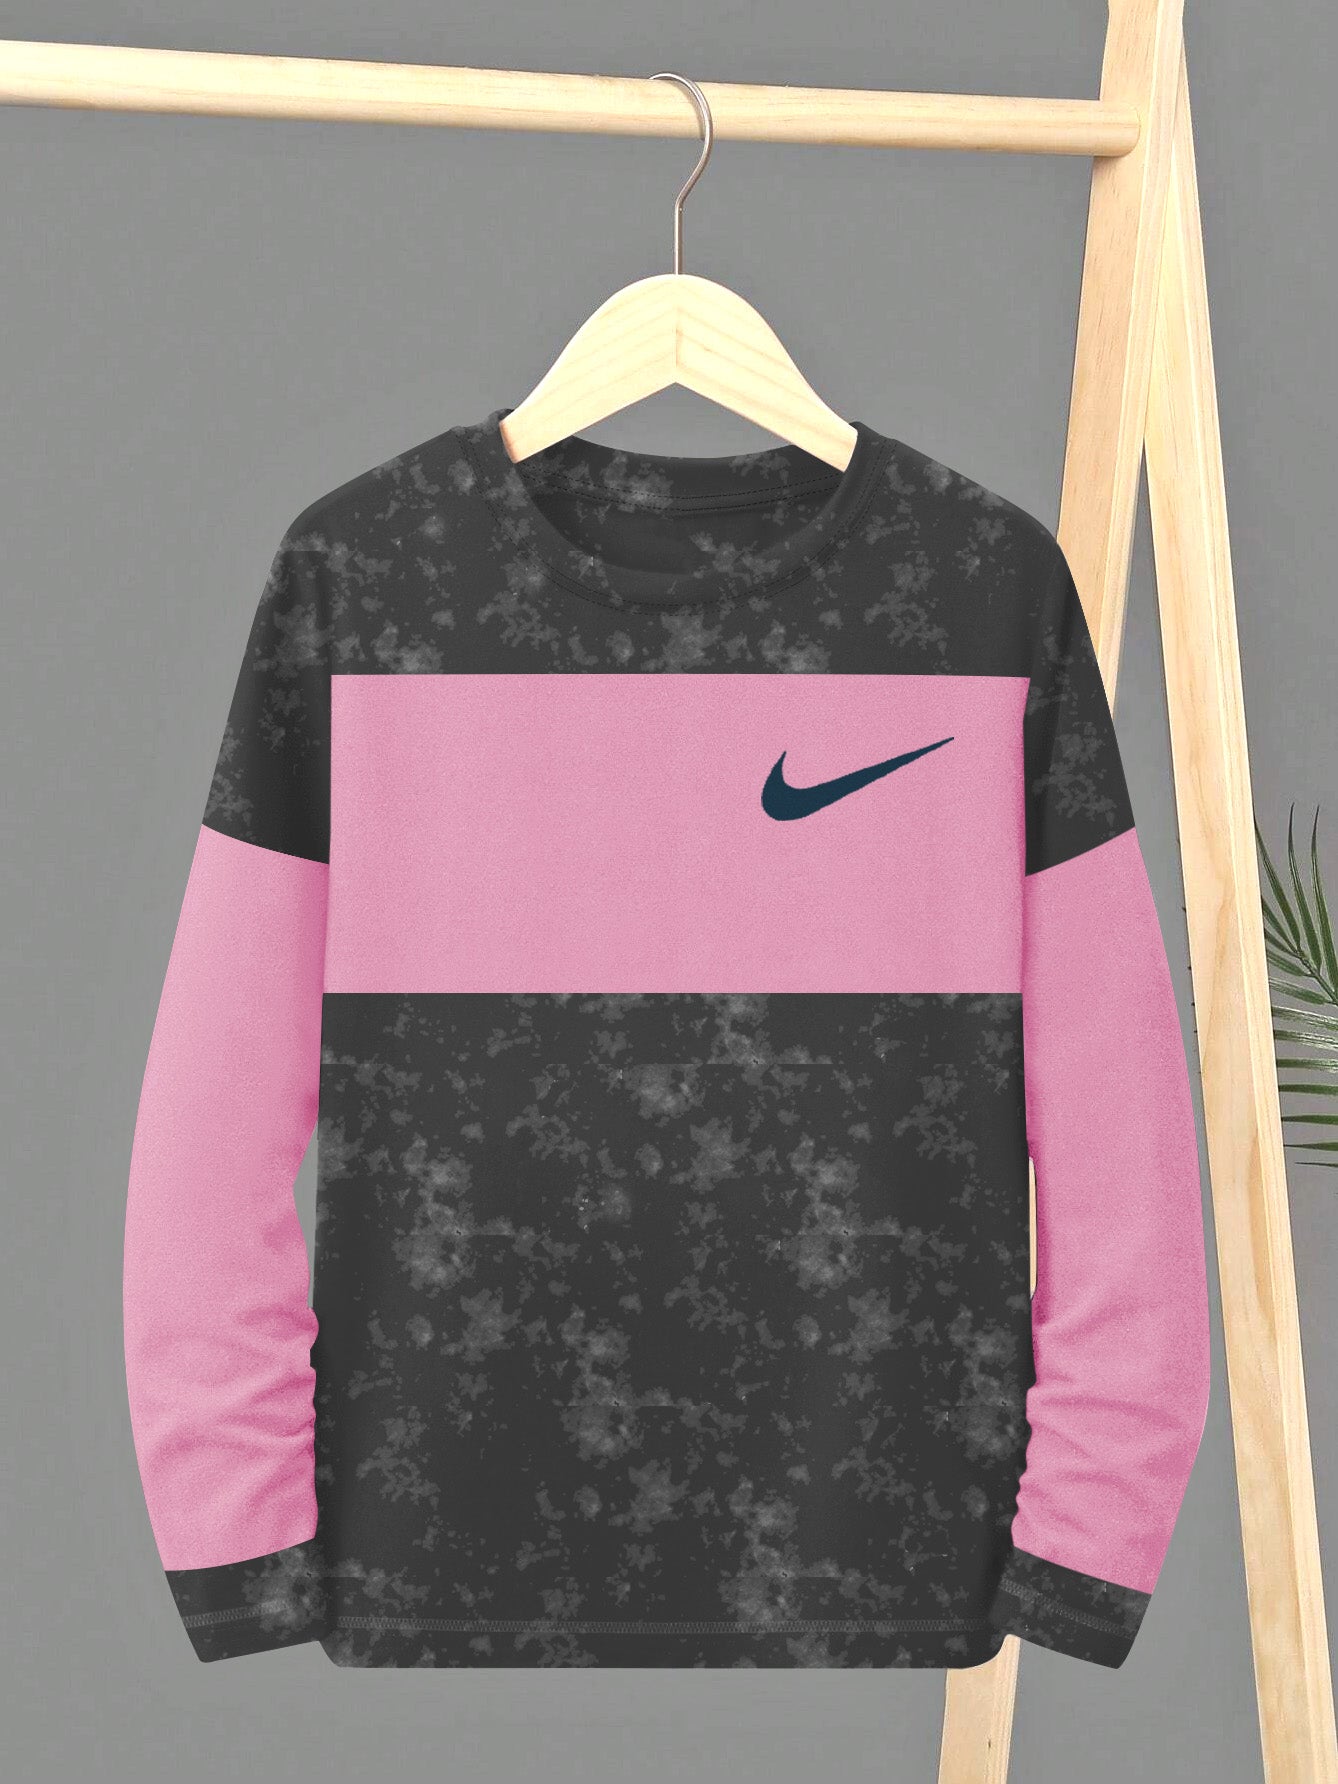 NK Single Jersey Long Sleeve Tee Shirt For Kids-Black Faded With Pink Panel-SP2276